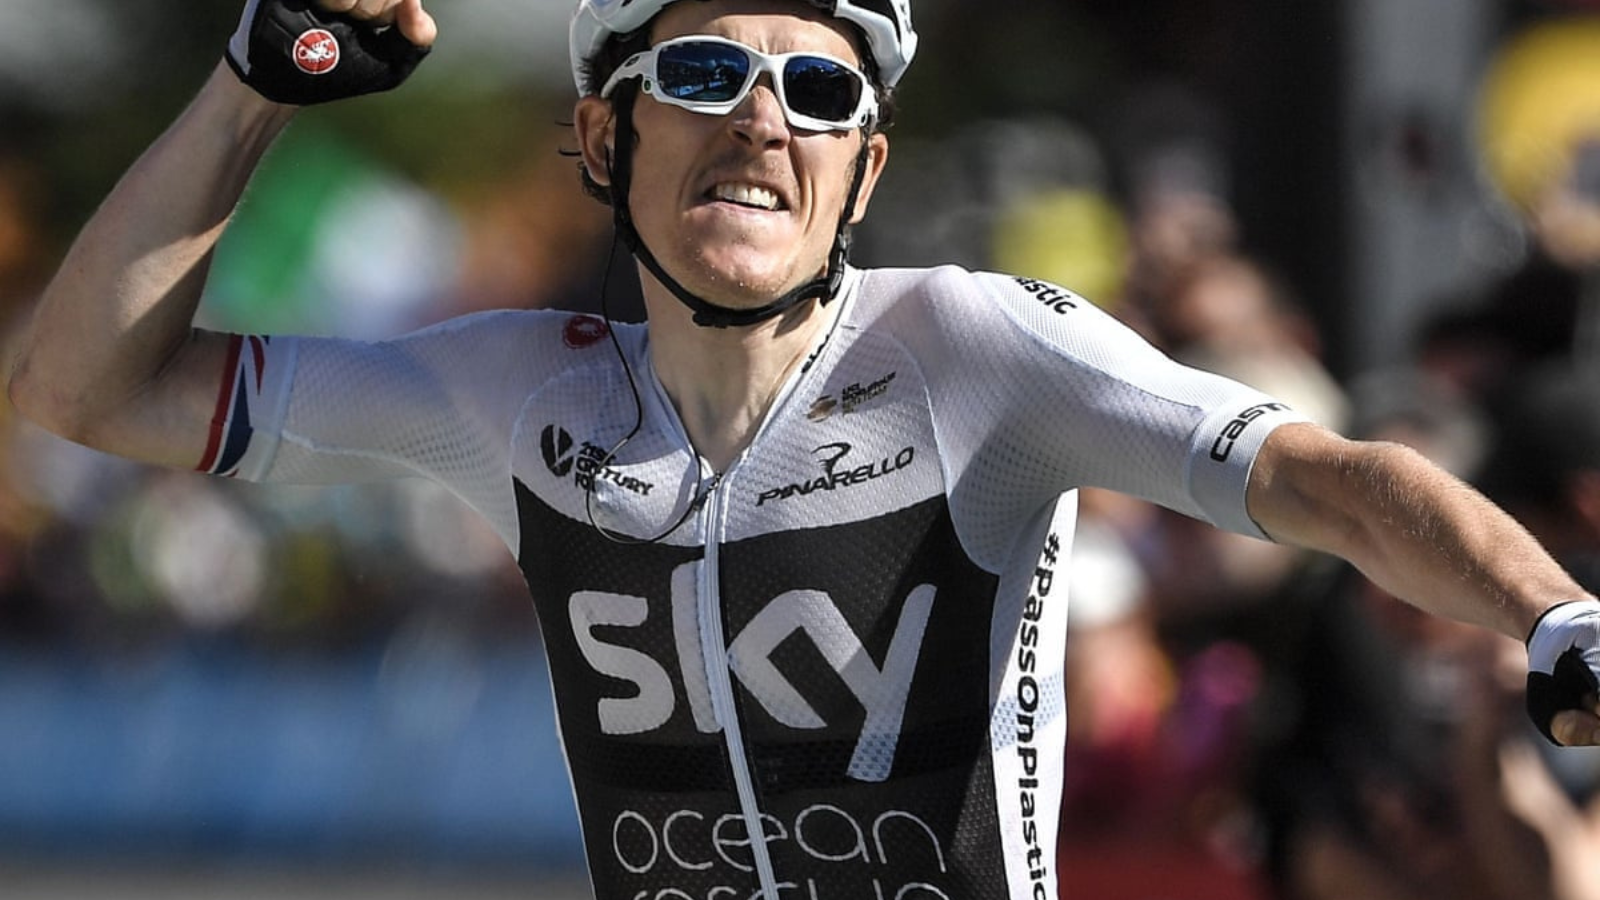 Geraint Thomas claims the yellow jersey after winning stage 11 of Tour de France 2018